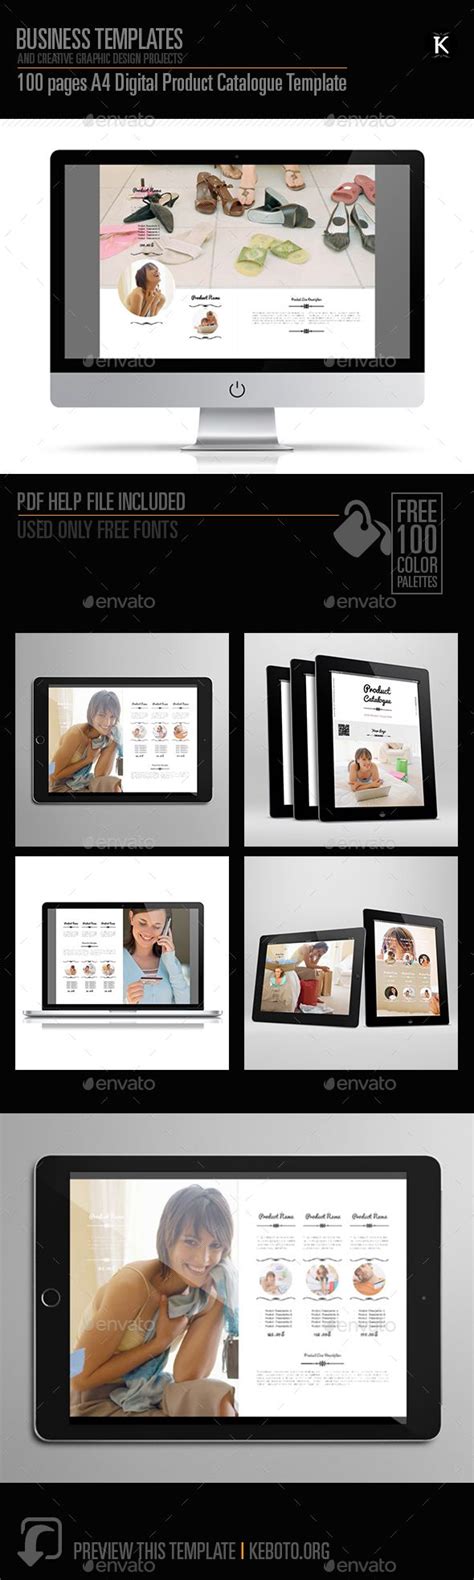 Preview this itemhere100 pages A4 Digital Product Catalogue ...